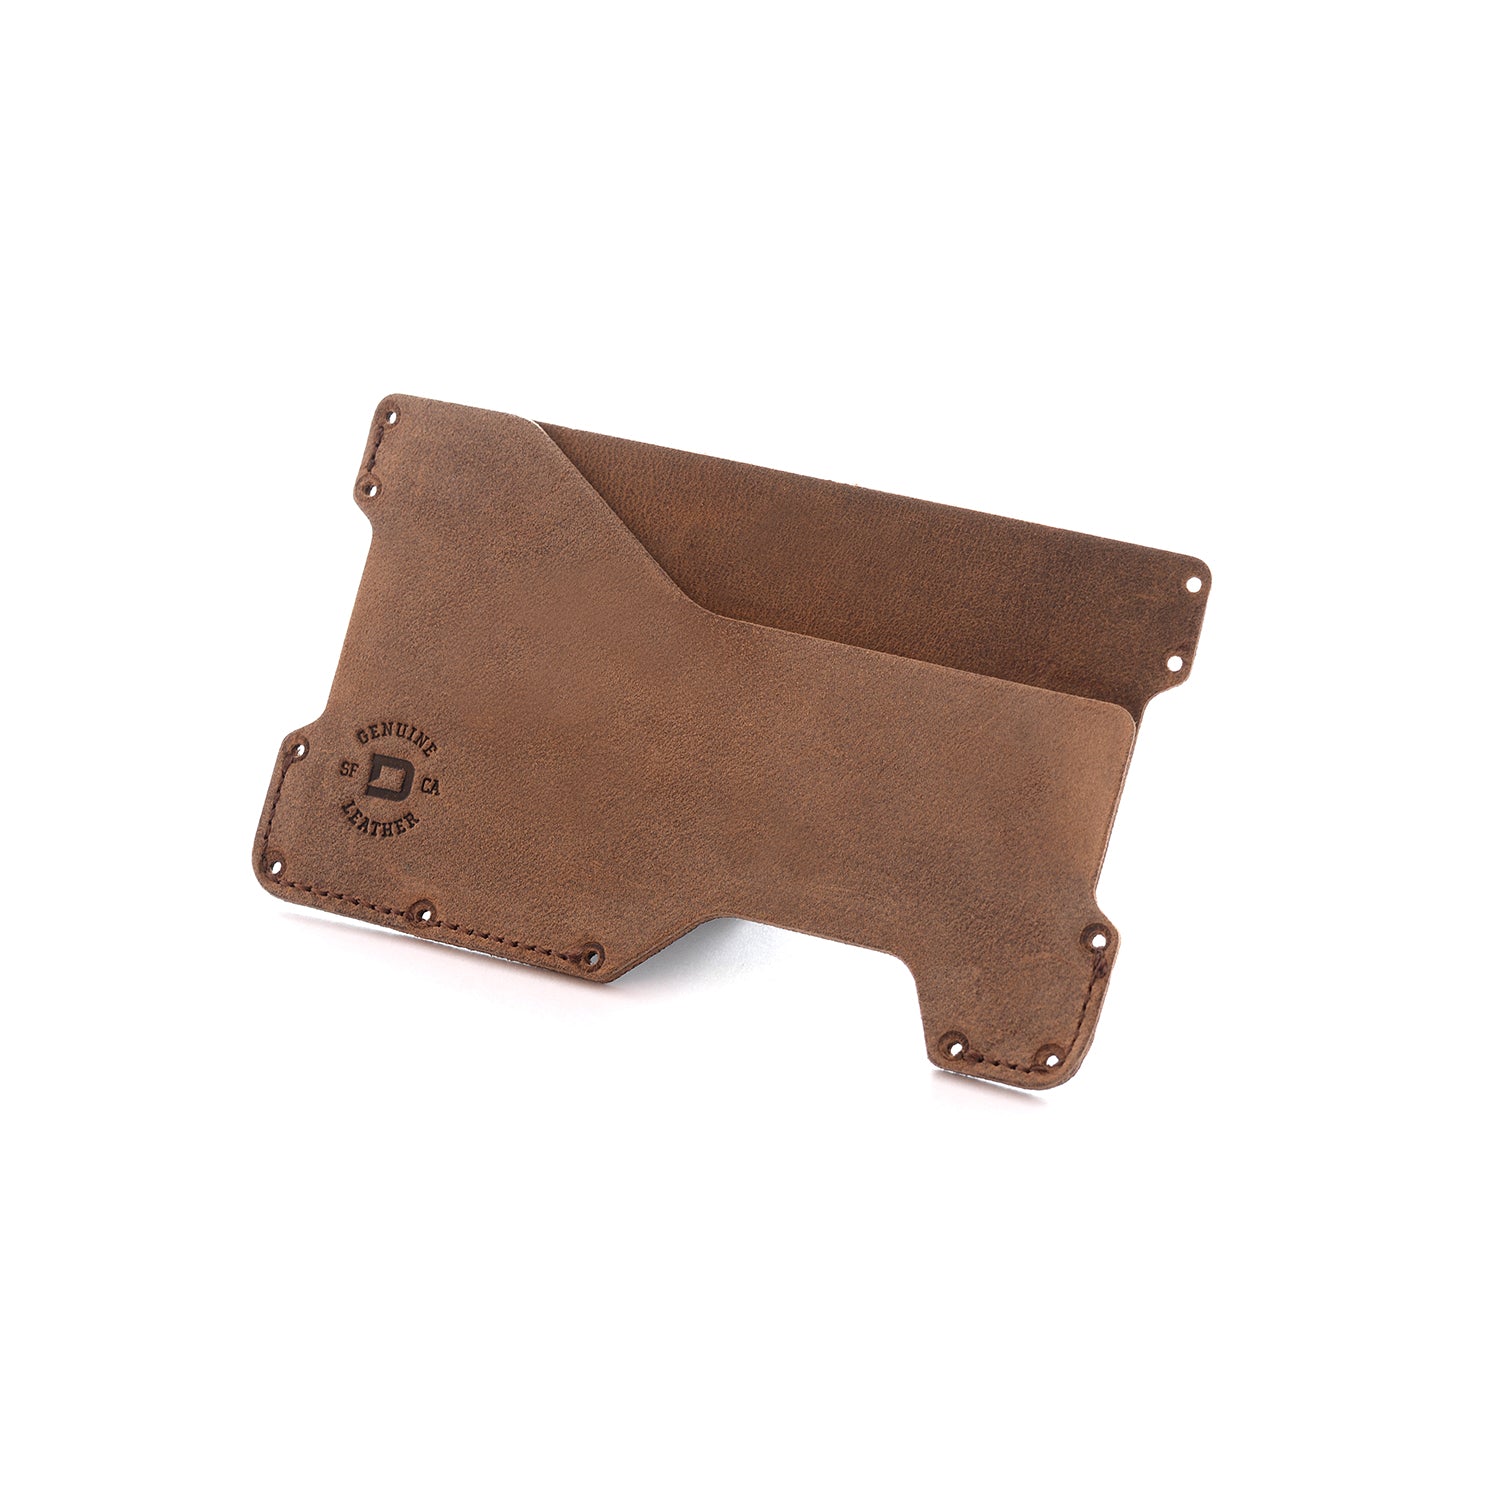 LEATHER POCKETS - Dango Products